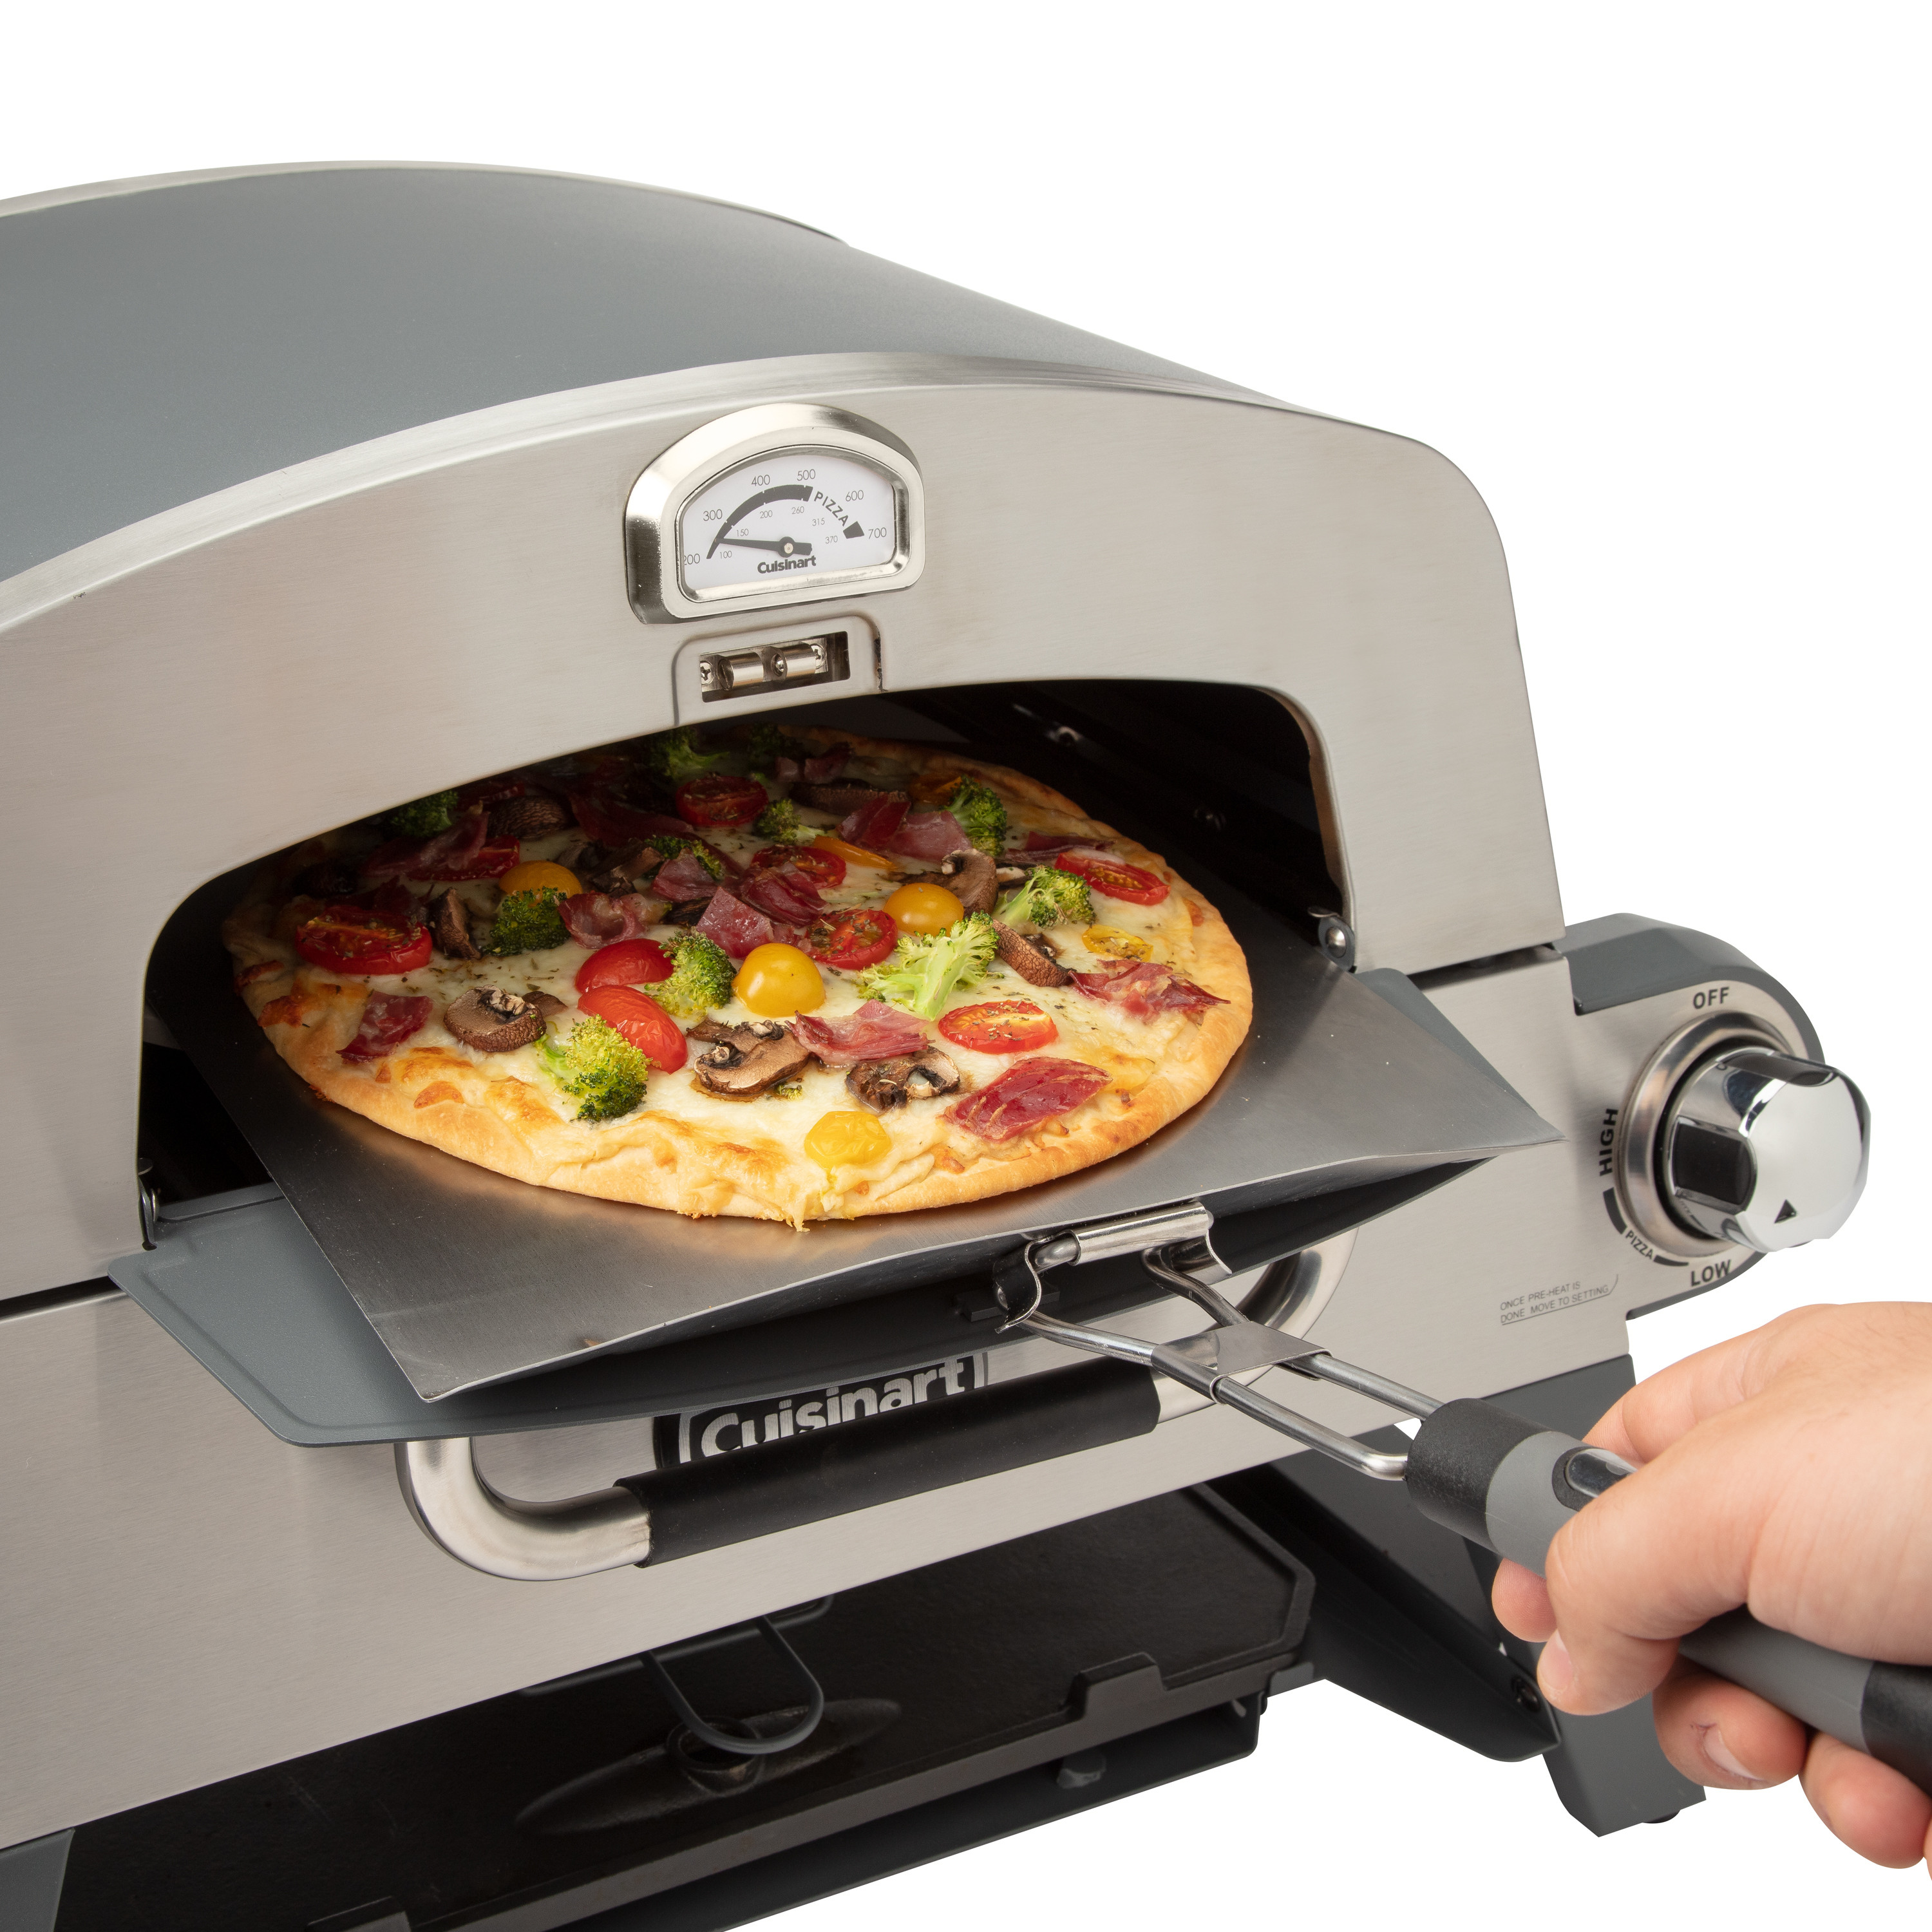 Cuisinart 3-in-1 Pizza Oven Plus, Griddle, and Grill Gray CGG-403P 